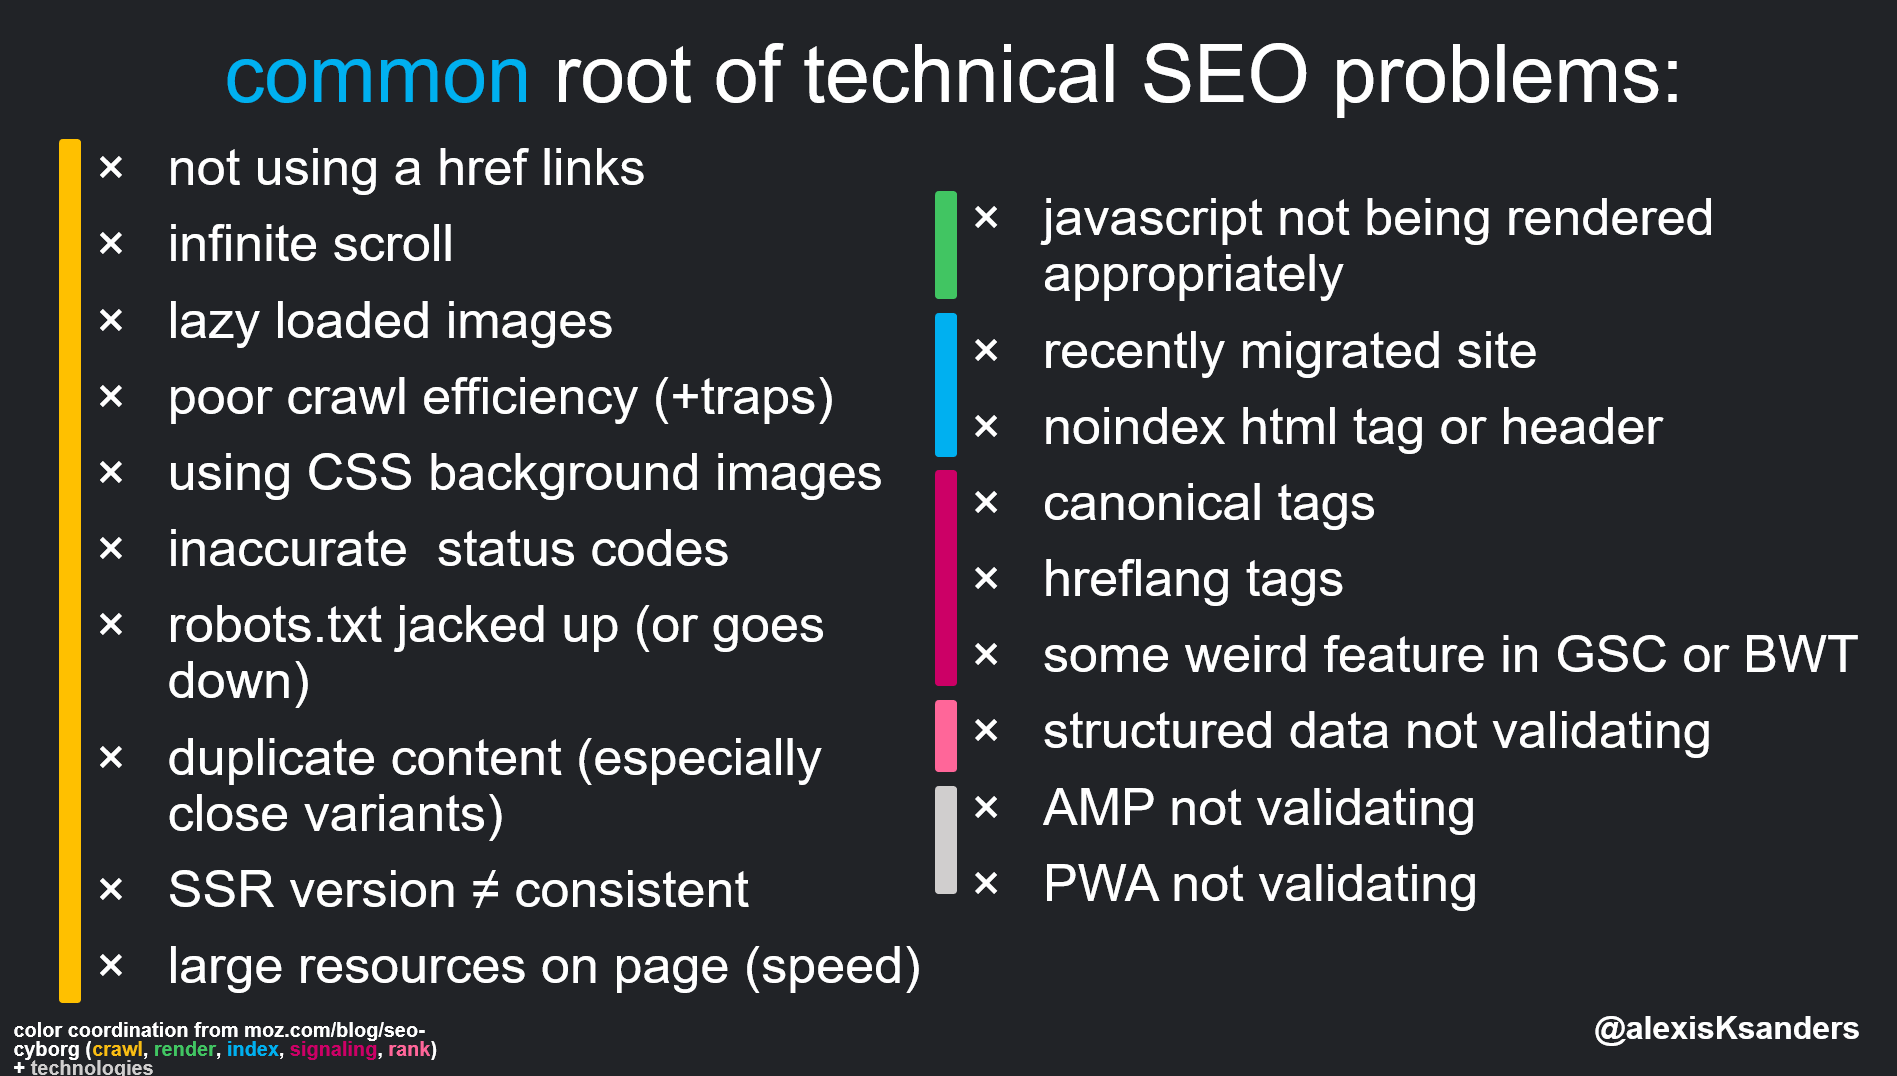 alexis list of the root of most SEO problems